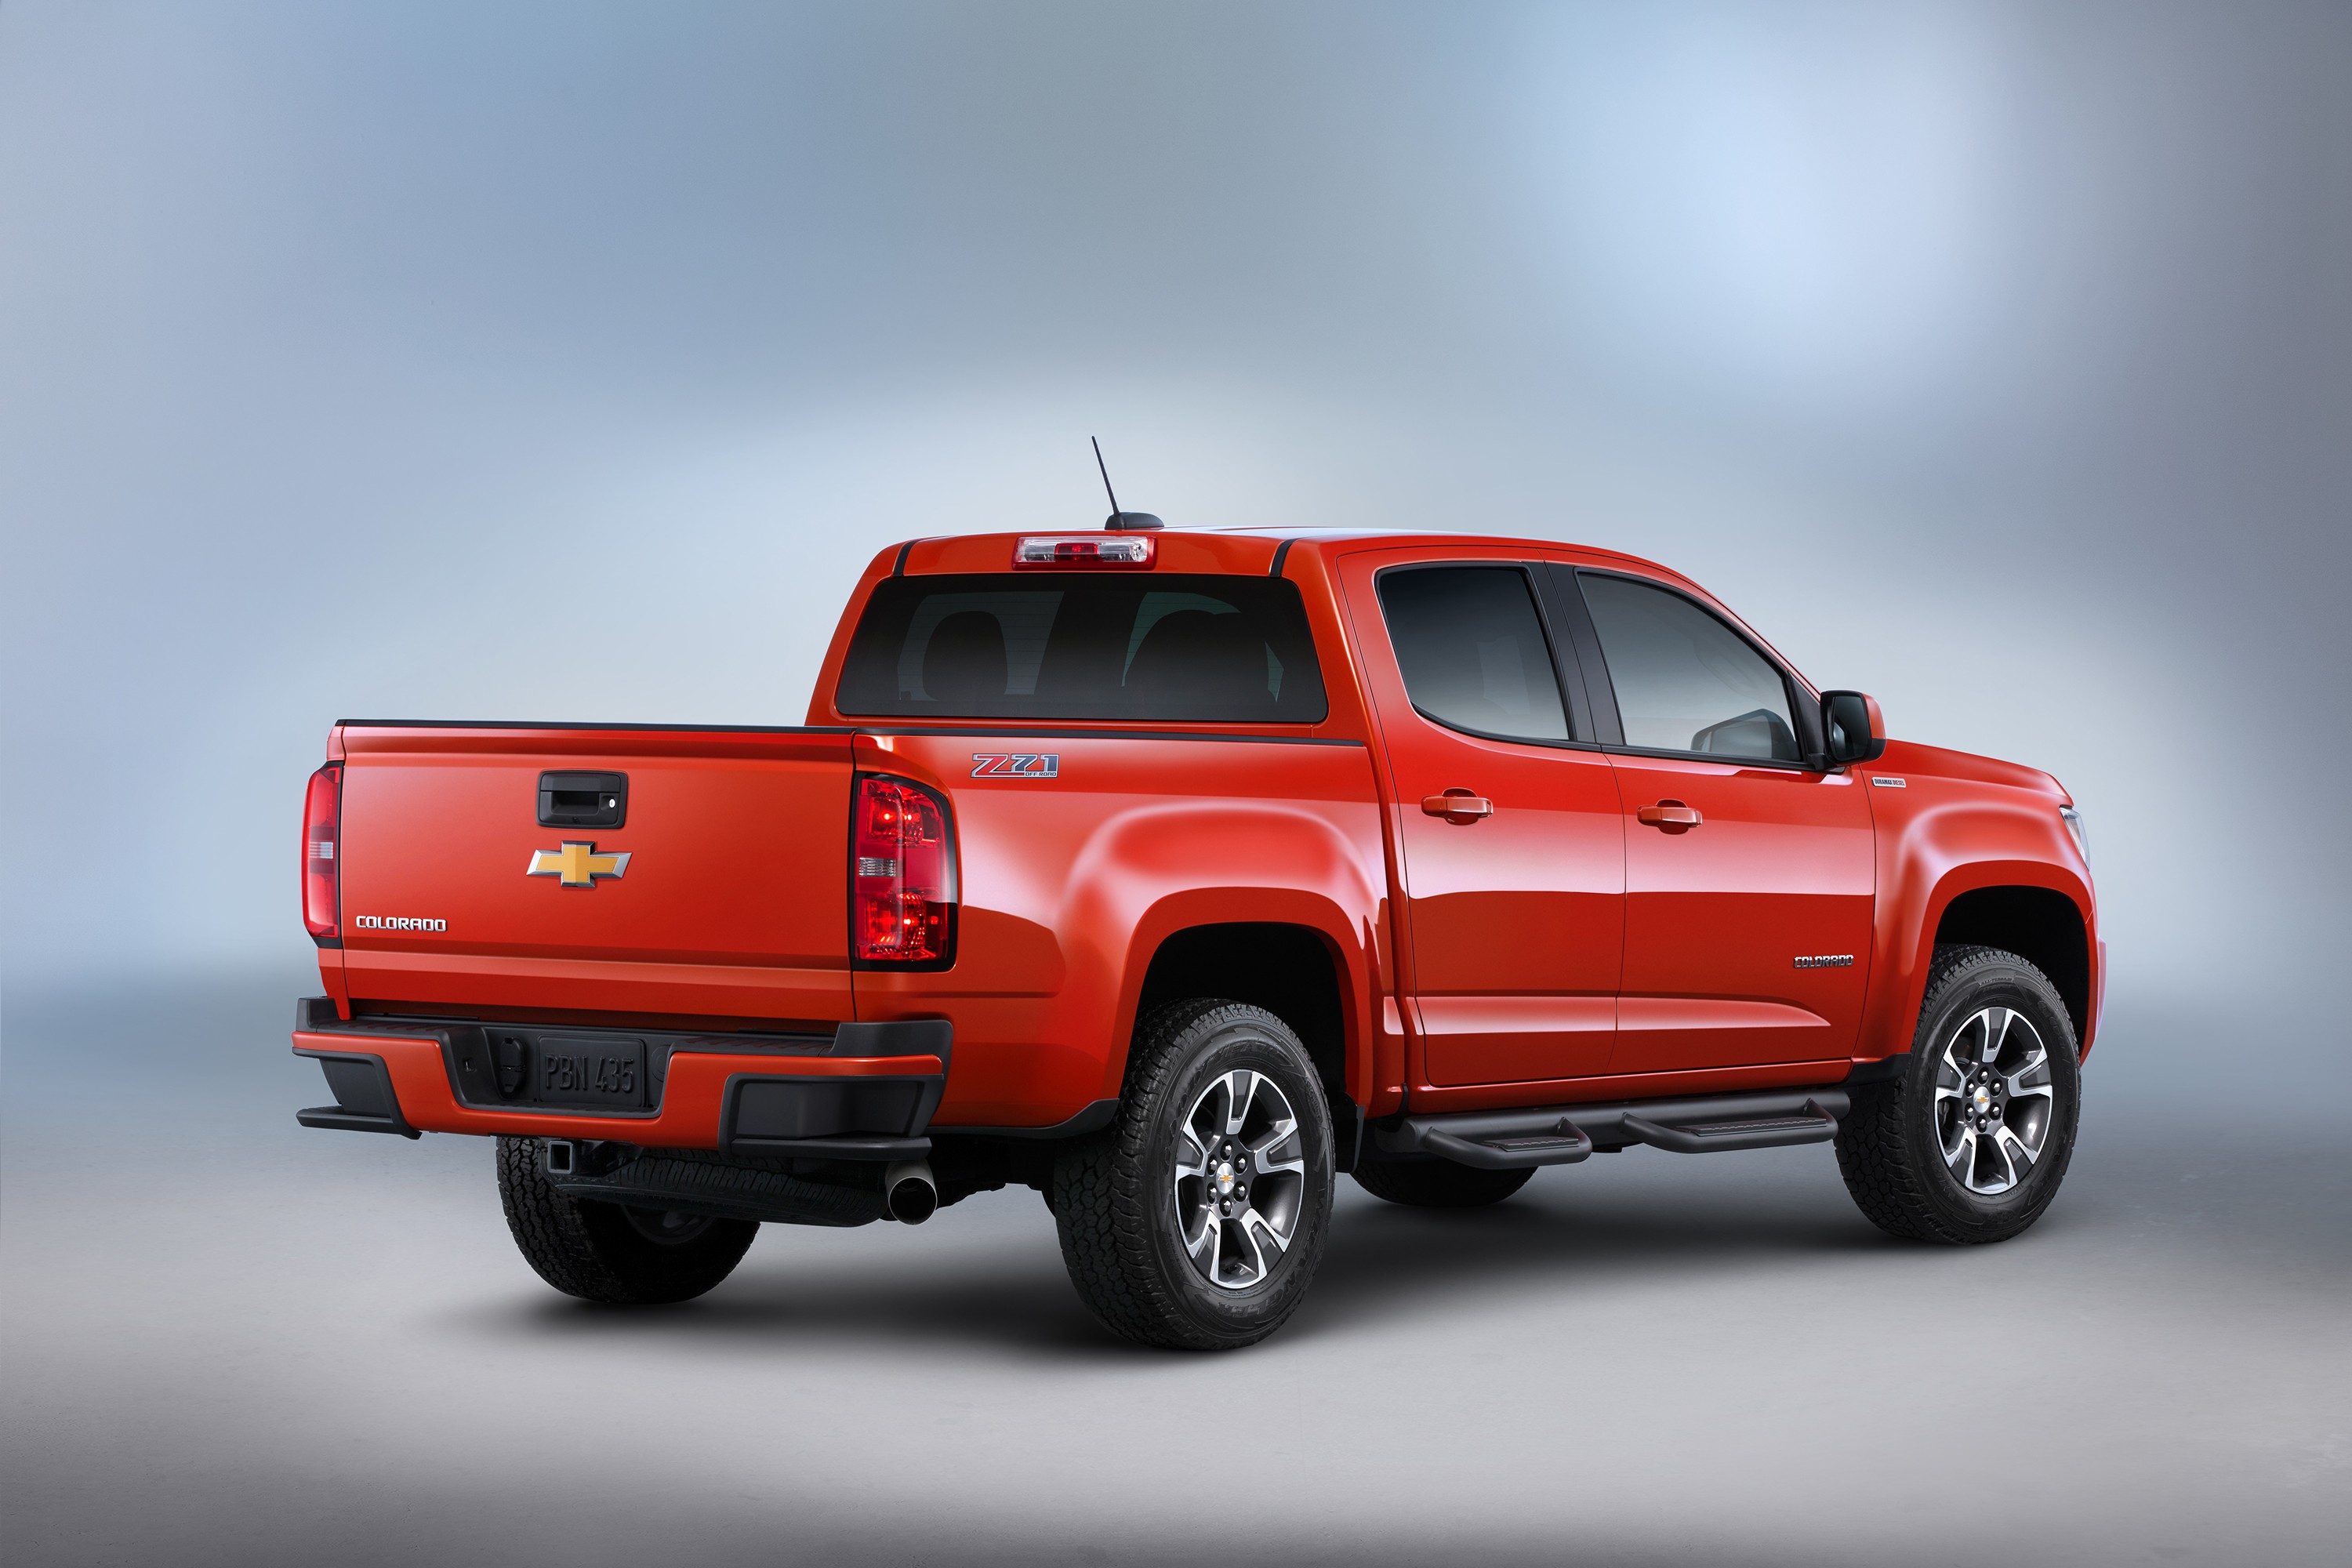 2016-chevrolet-colorado-rewarded-with-2-8-liter-diesel-mill-towing